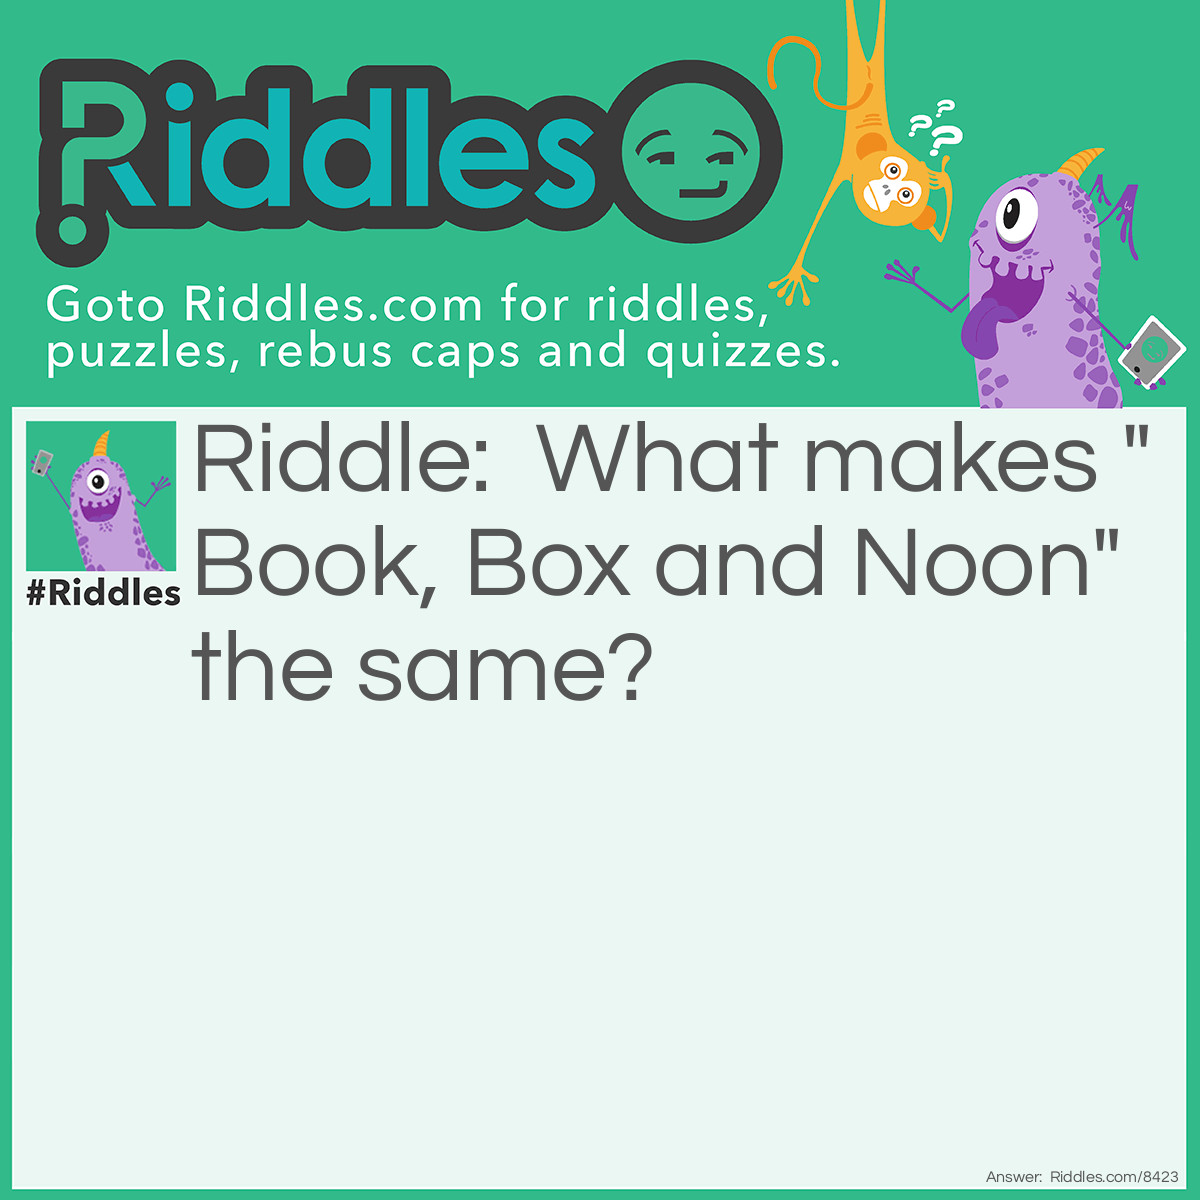 Riddle: What makes "Book, Box and Noon" the same? Answer: There all nouns.